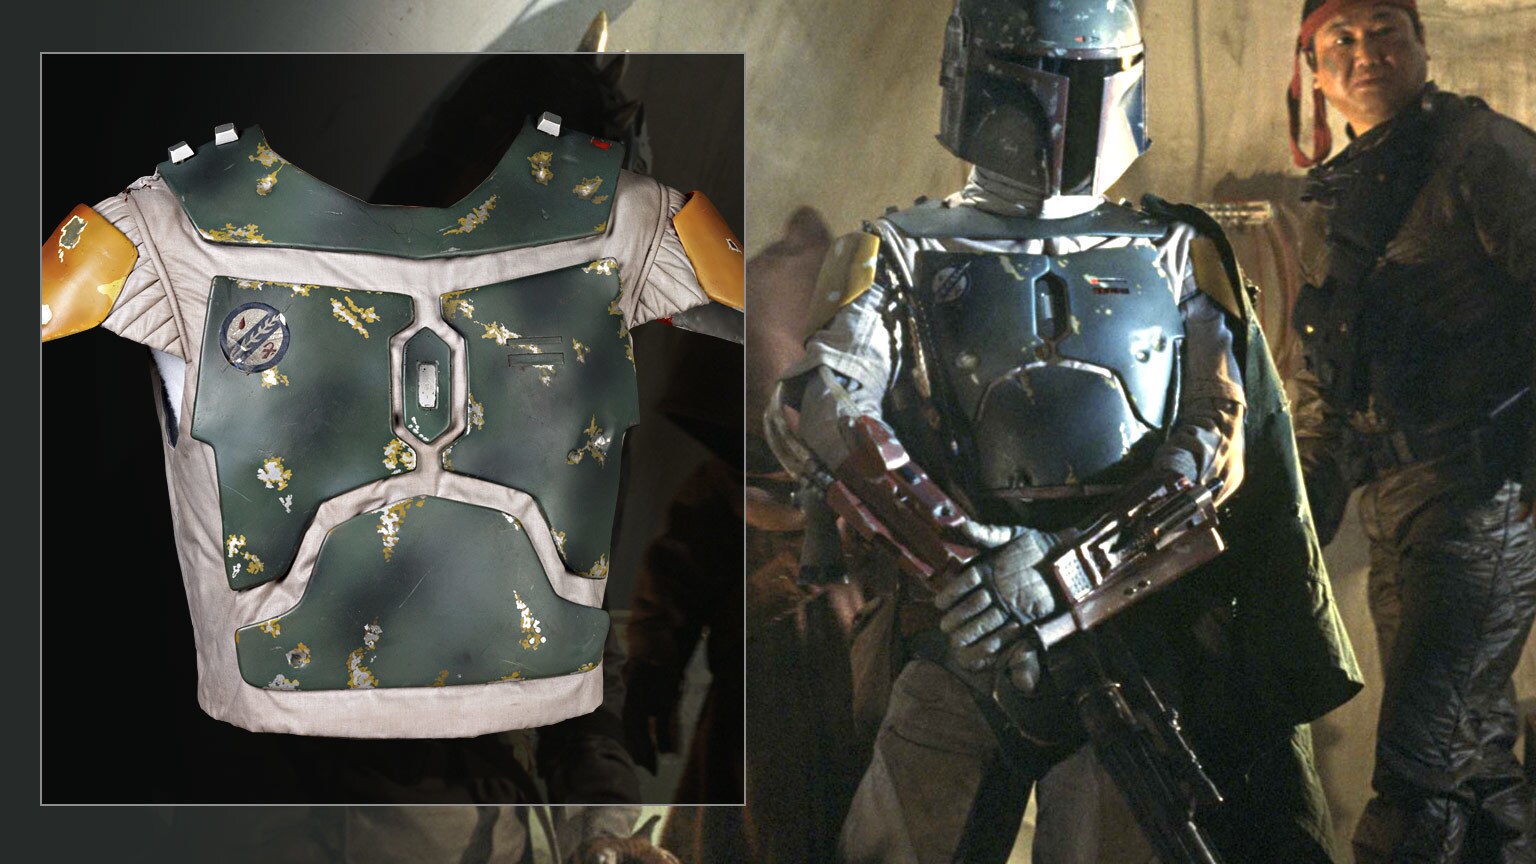 An armored chest plate protects Boba Fett's upper body.